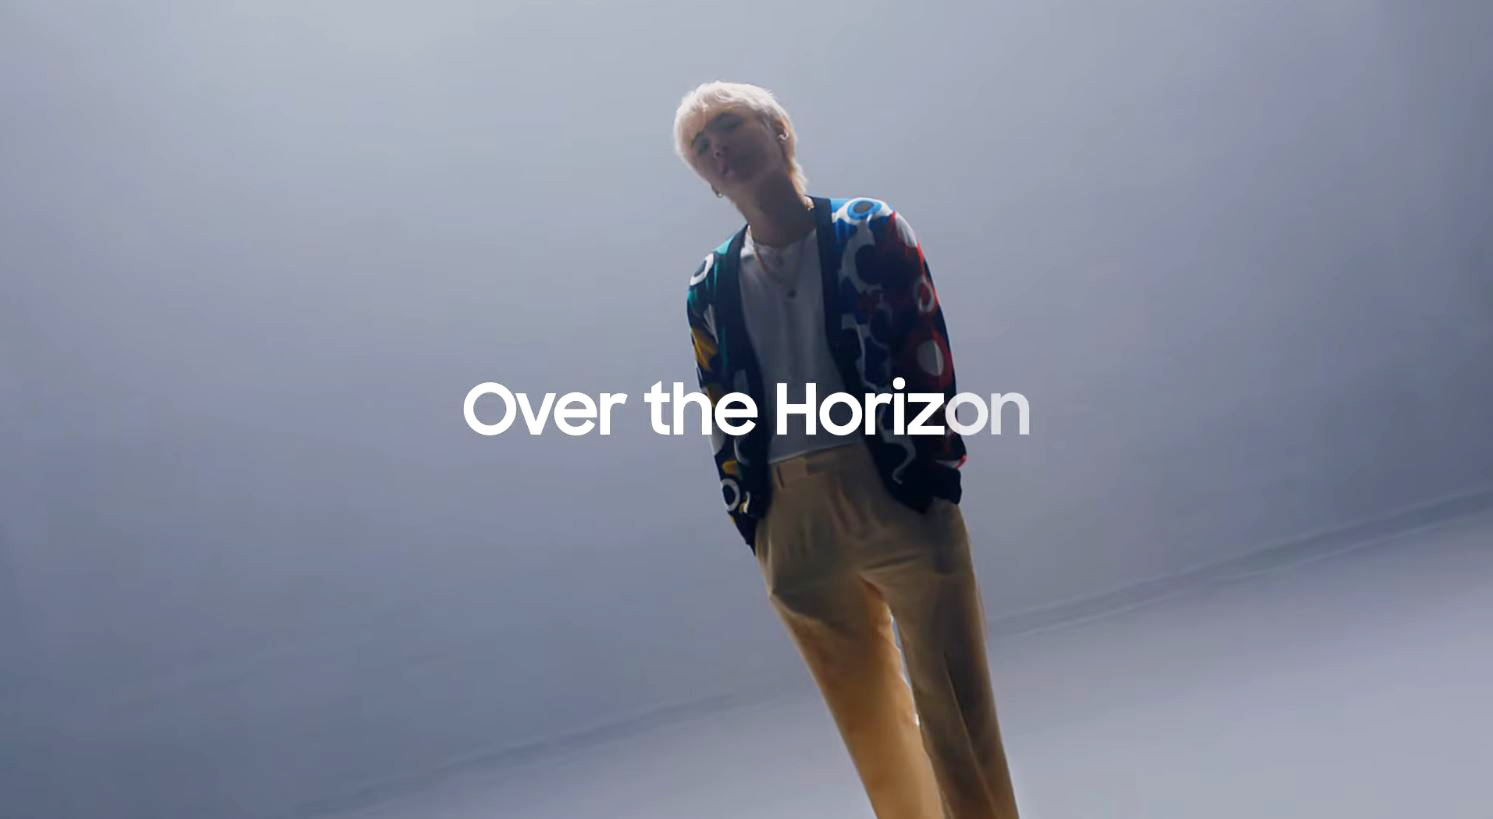 Prod suga of bts. Over the Horizon by suga of BTS. Suga Samsung over the Horizon. Samsung over the Horizon by suga of BTS. БТС suga over the Horizon 2021.